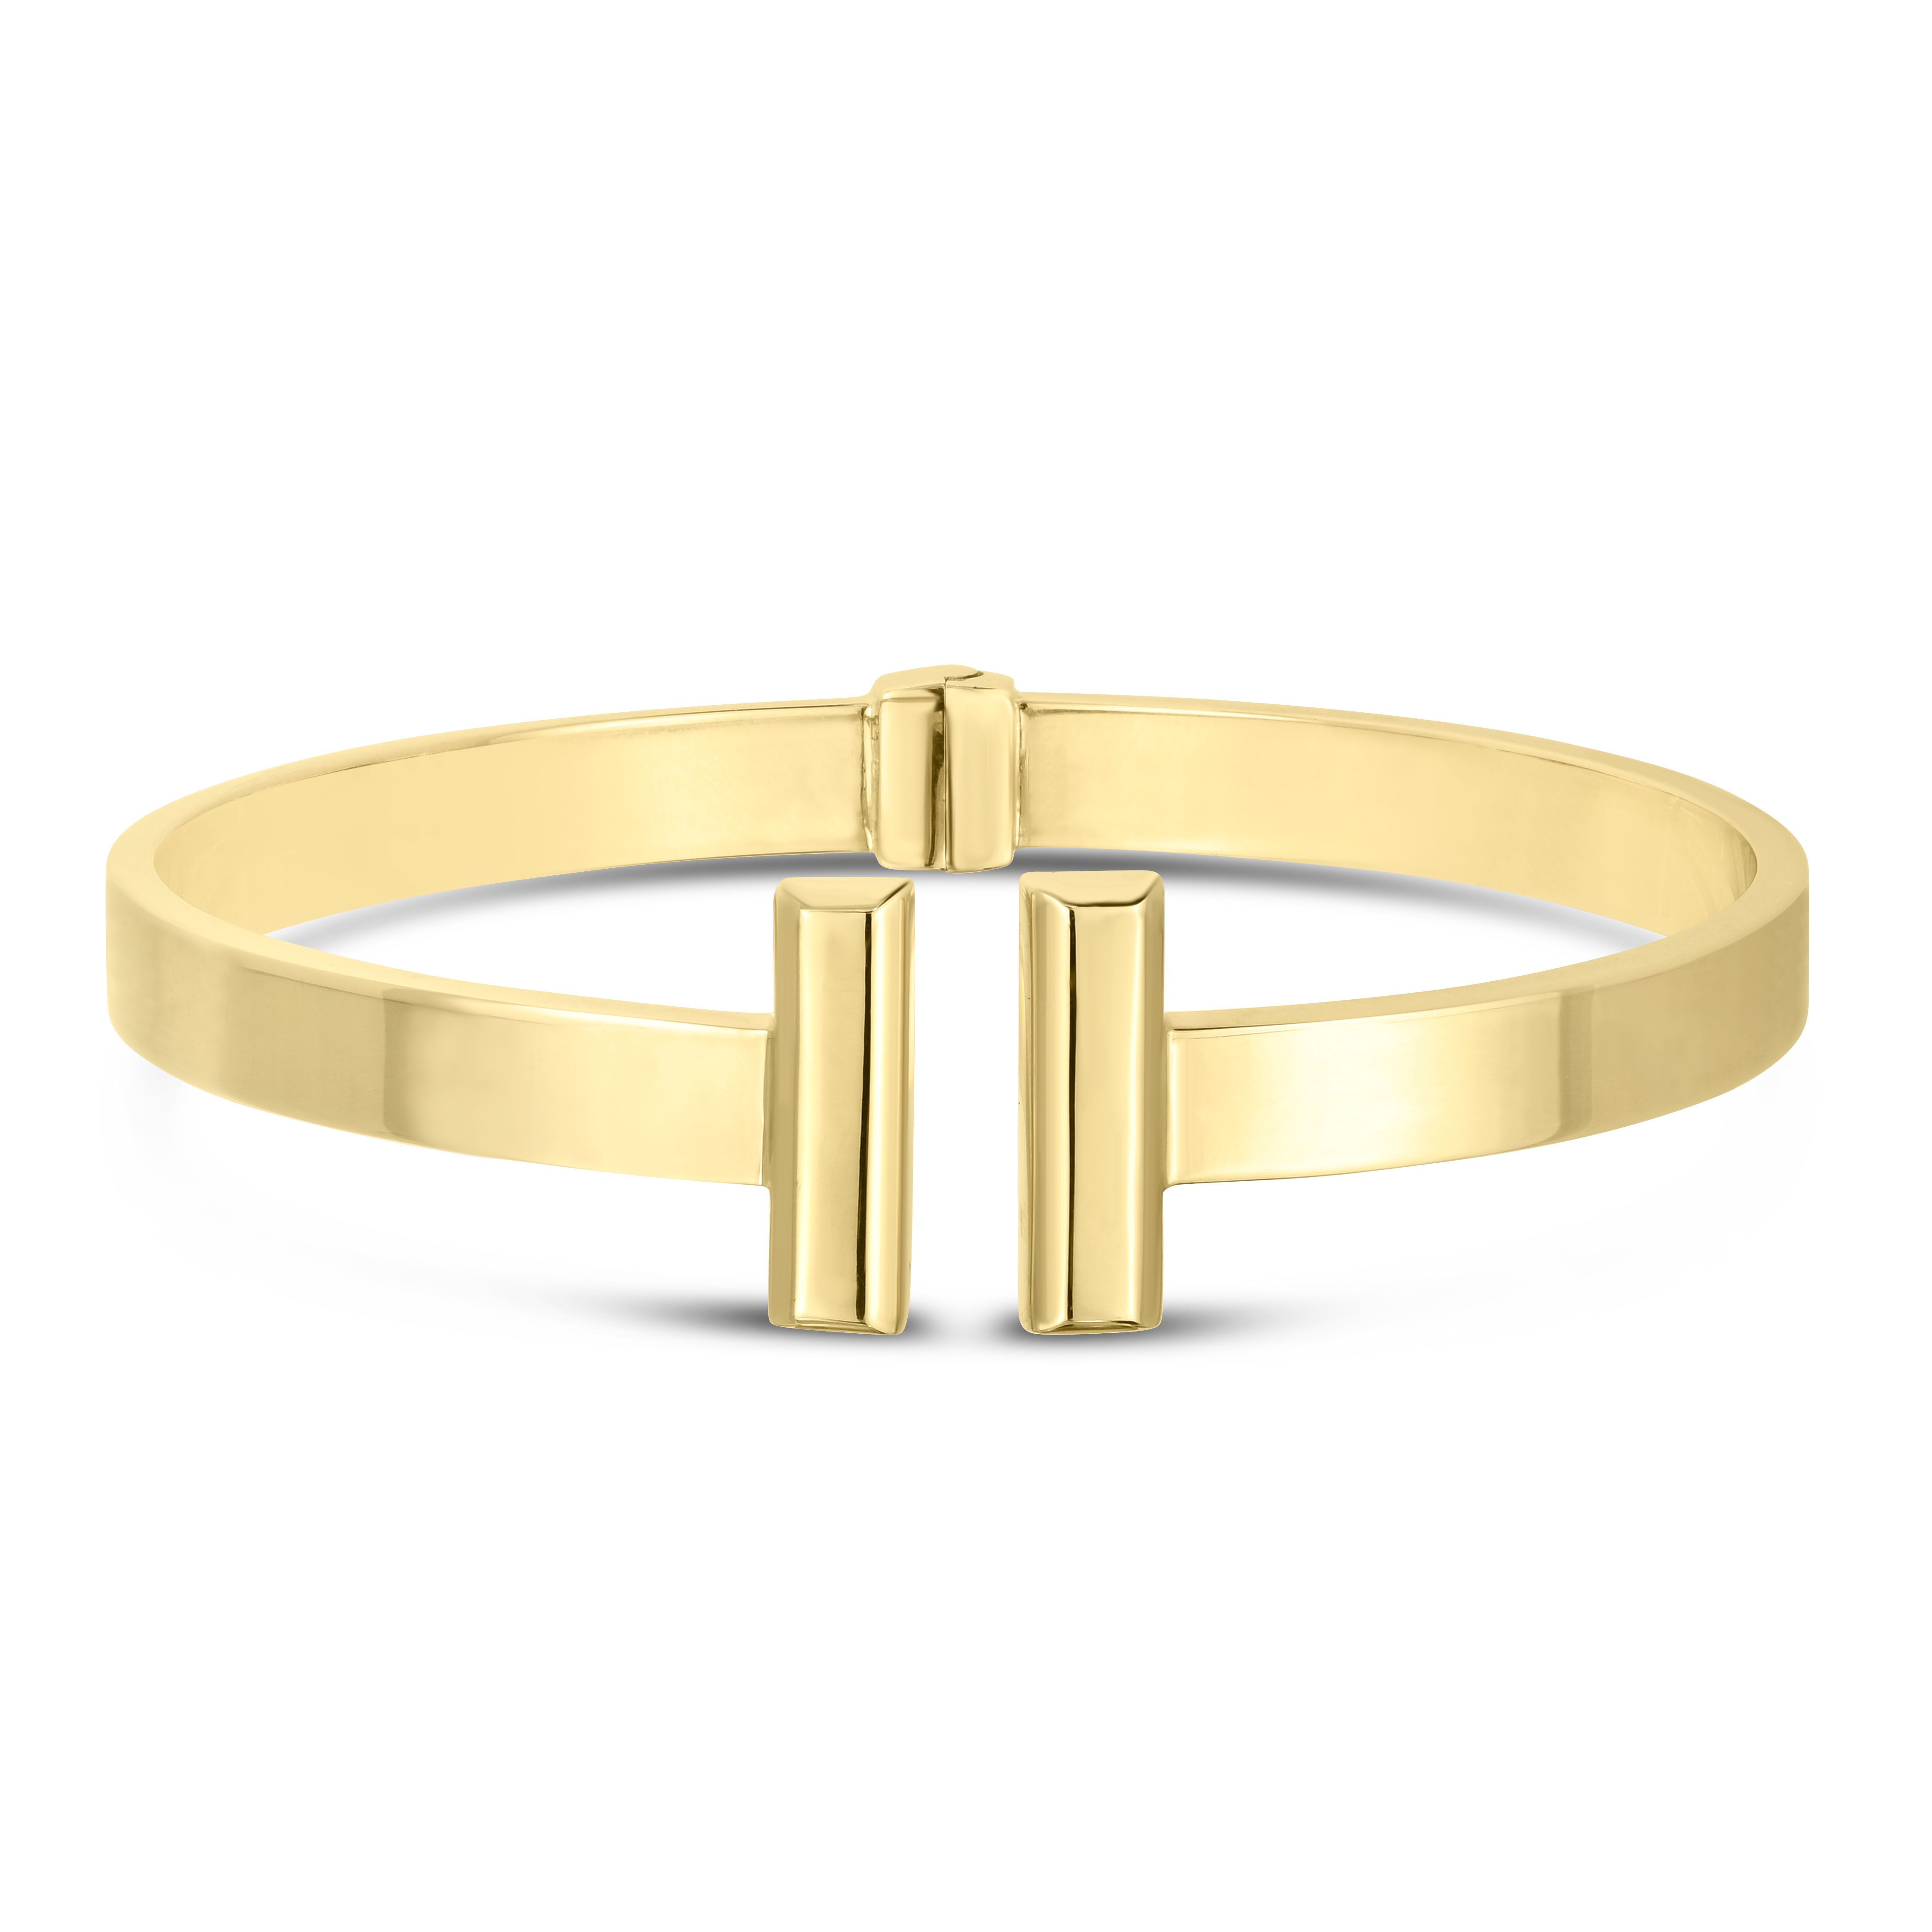 14k and 18k solid gold bracelet cuff with personalization – Praxis Jewelry